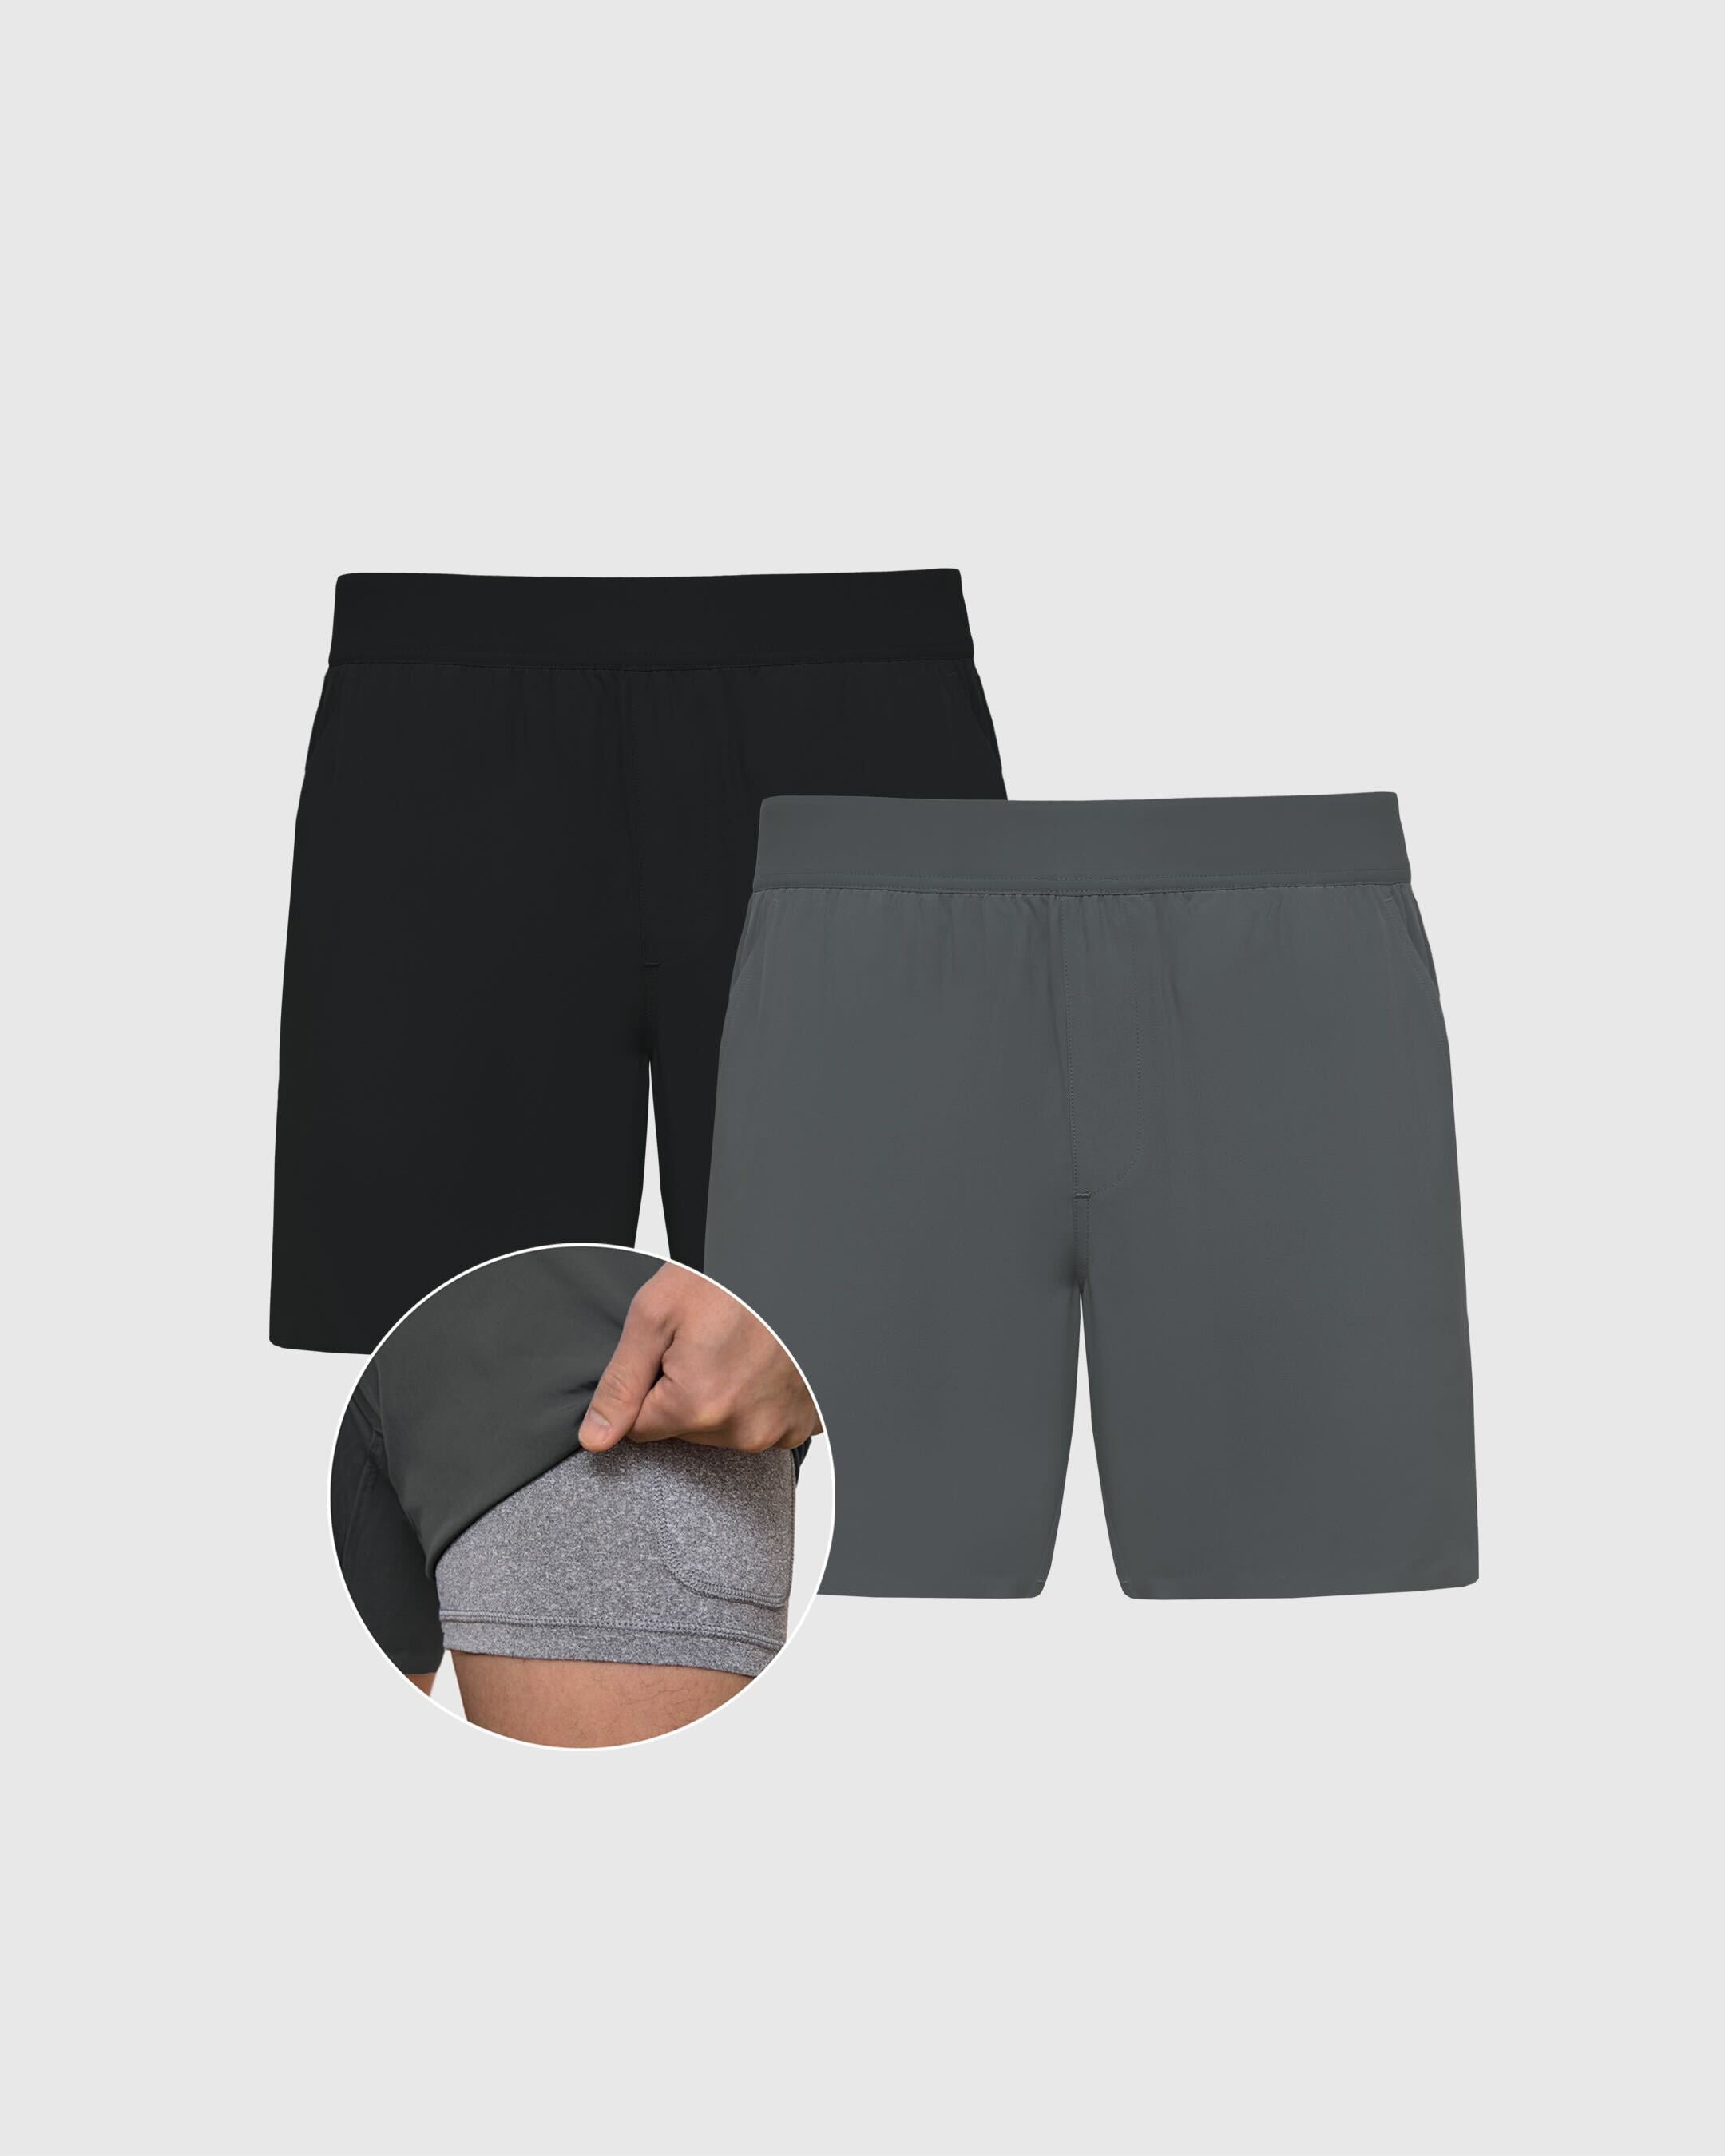 Black & Carbon 7" 2-In-1 Active Training Shorts 2-Pack